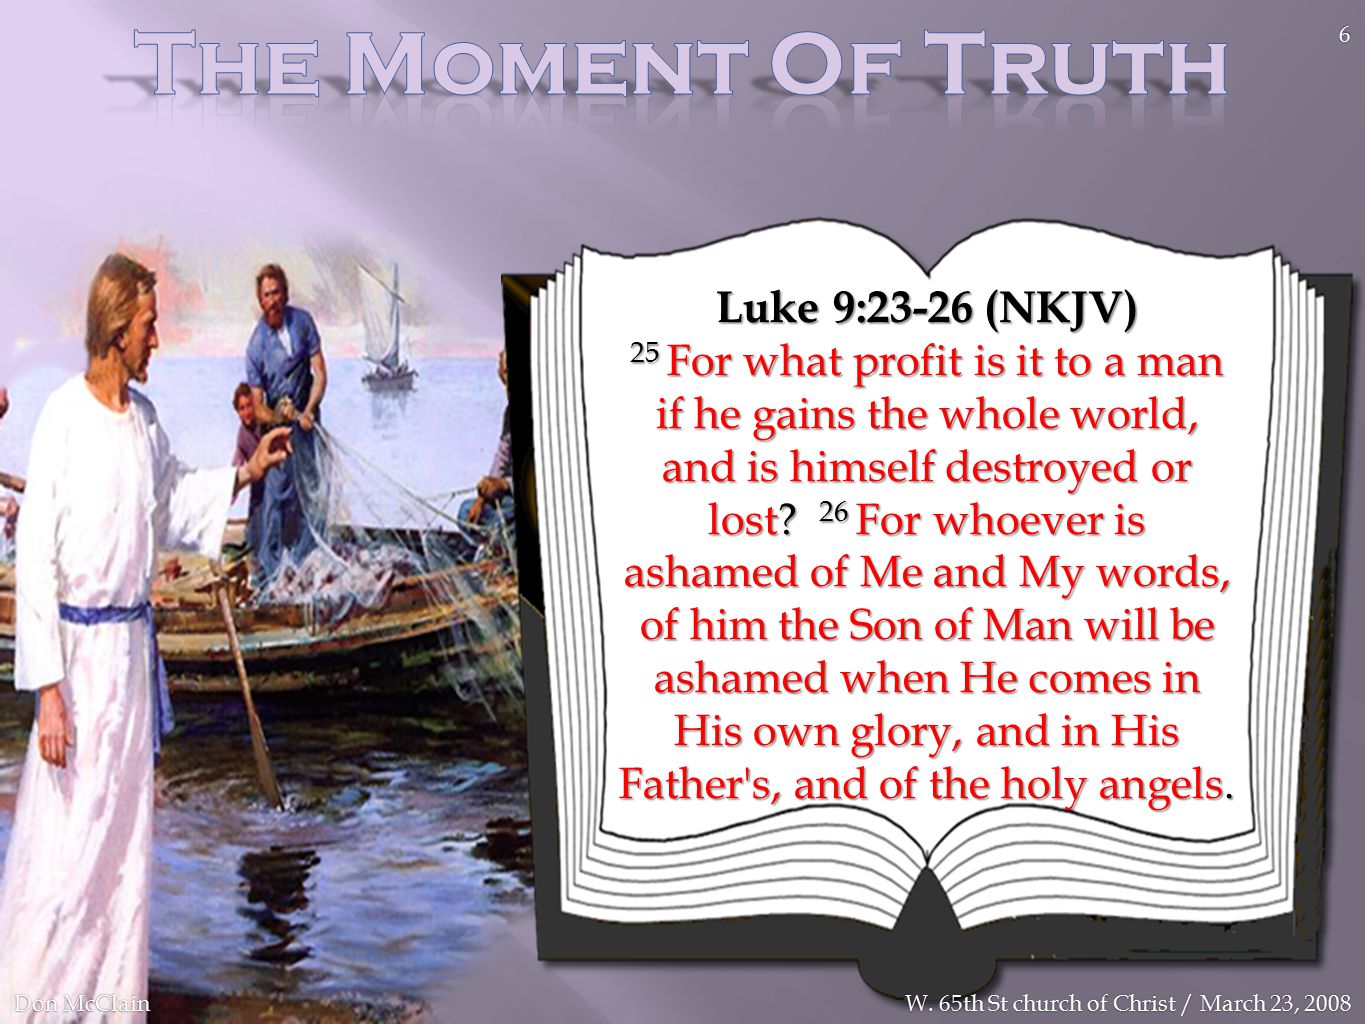 Luke 9:23-26 (NKJV) 25 For what profit is it to a man if he gains the whole world, and is himself destroyed or lost.